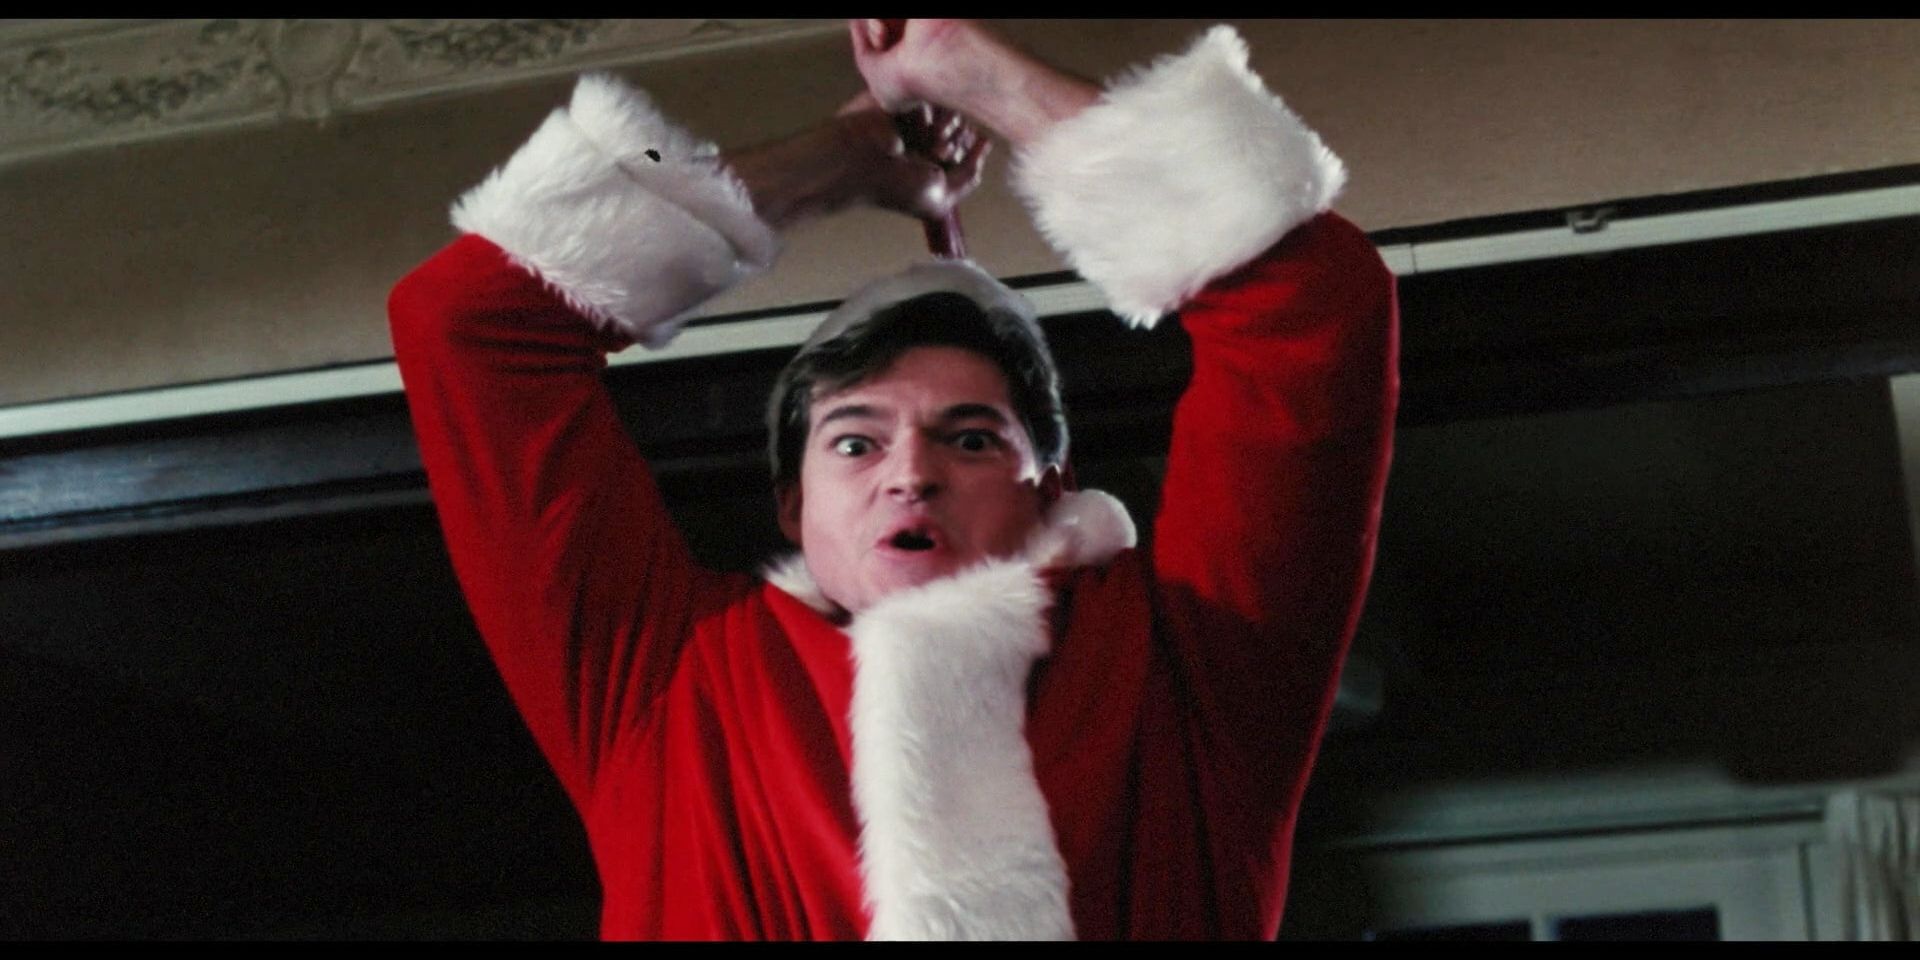 Ricky wielding an ax in the movie Silent Night, Deadly Night Part 2.